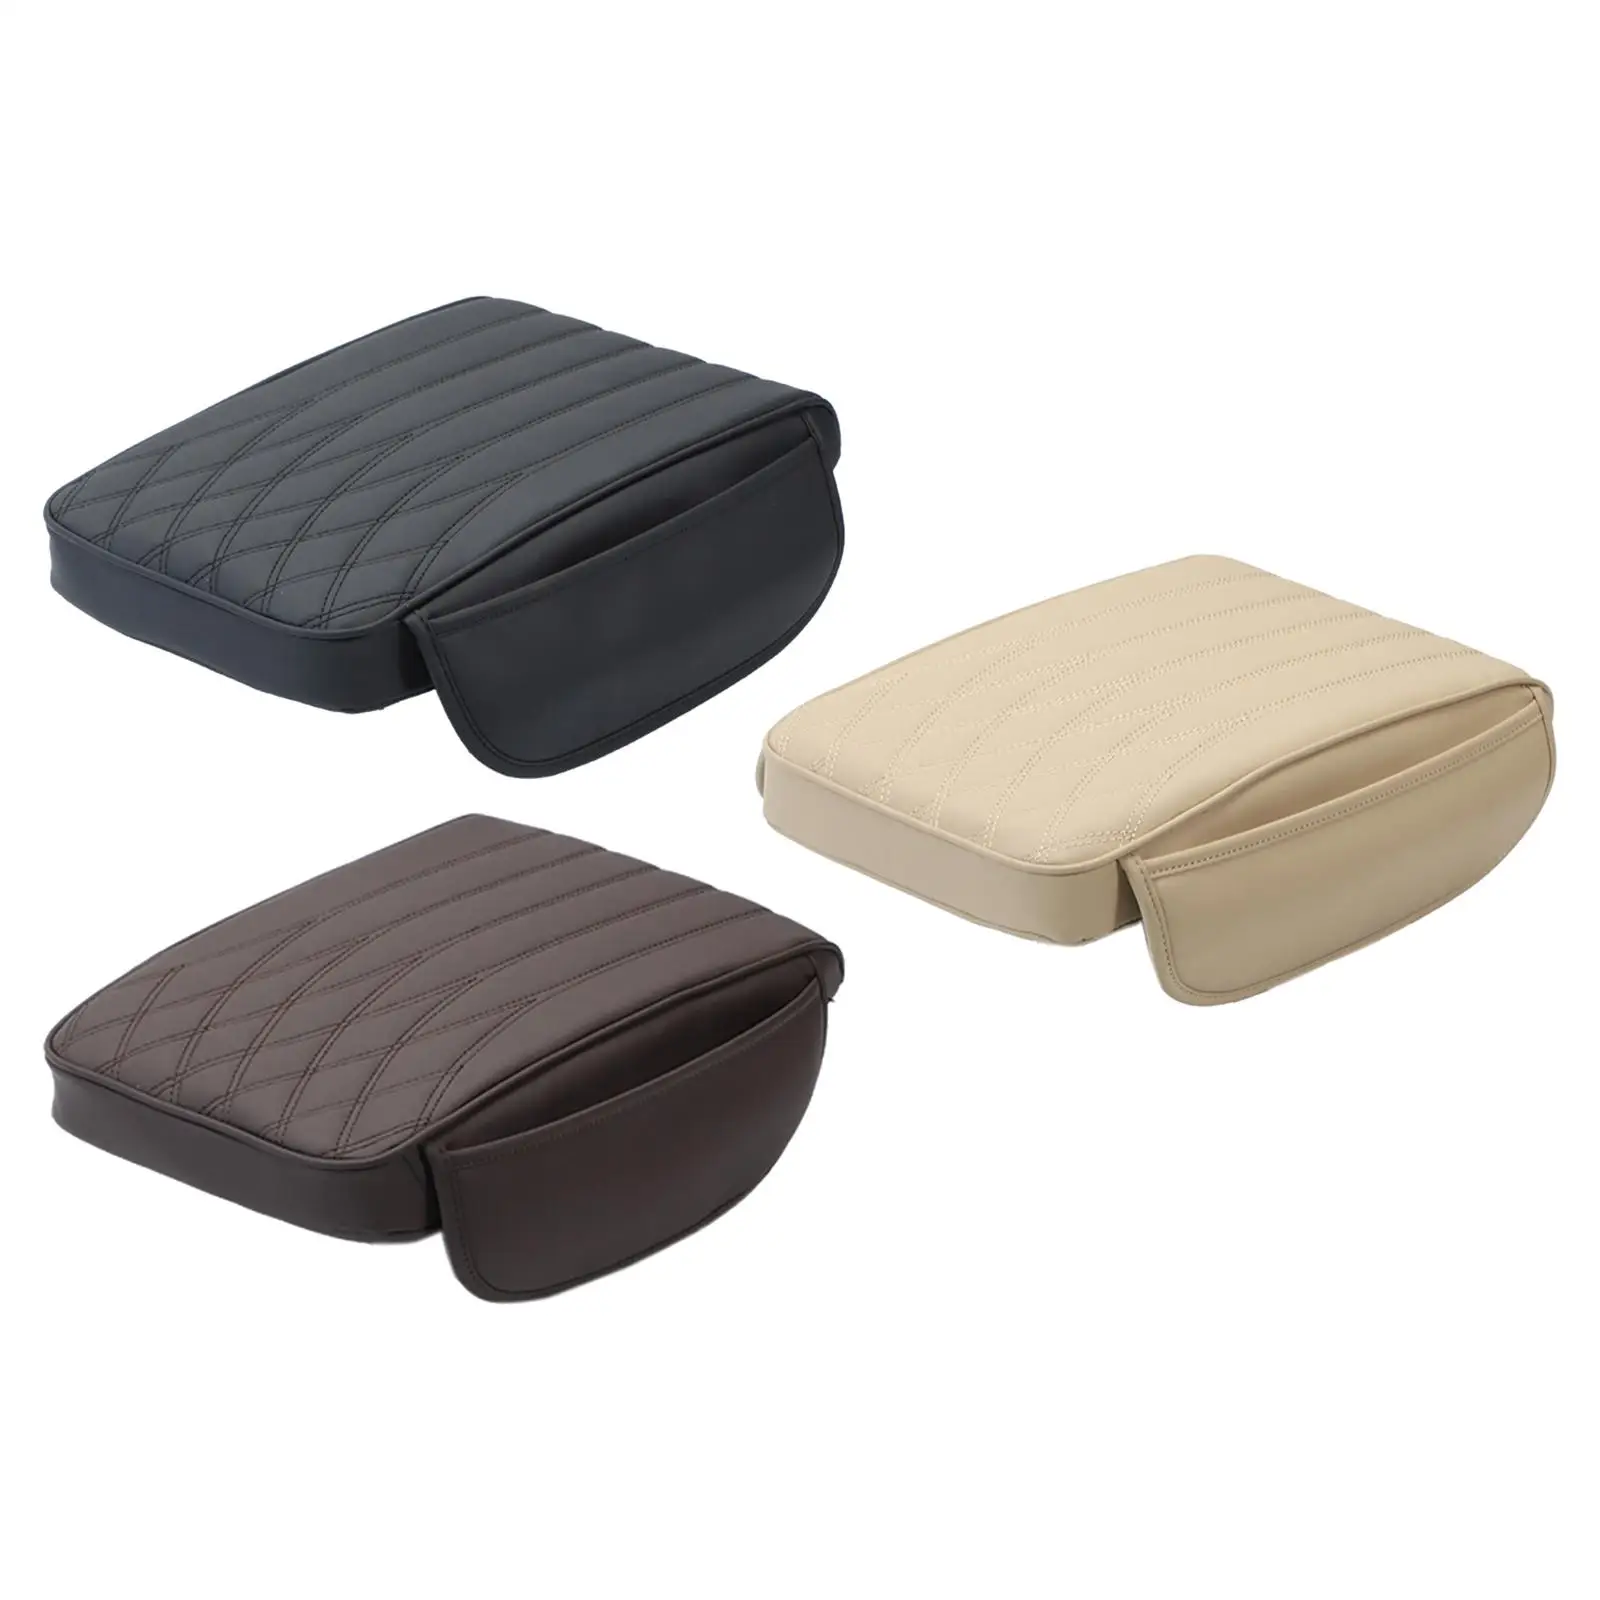 Car Armrest Cushion PU Leather Universal Arm Rest Pad Middle Console Protector Car Armrest Box Cover for Truck Vehicle Auto